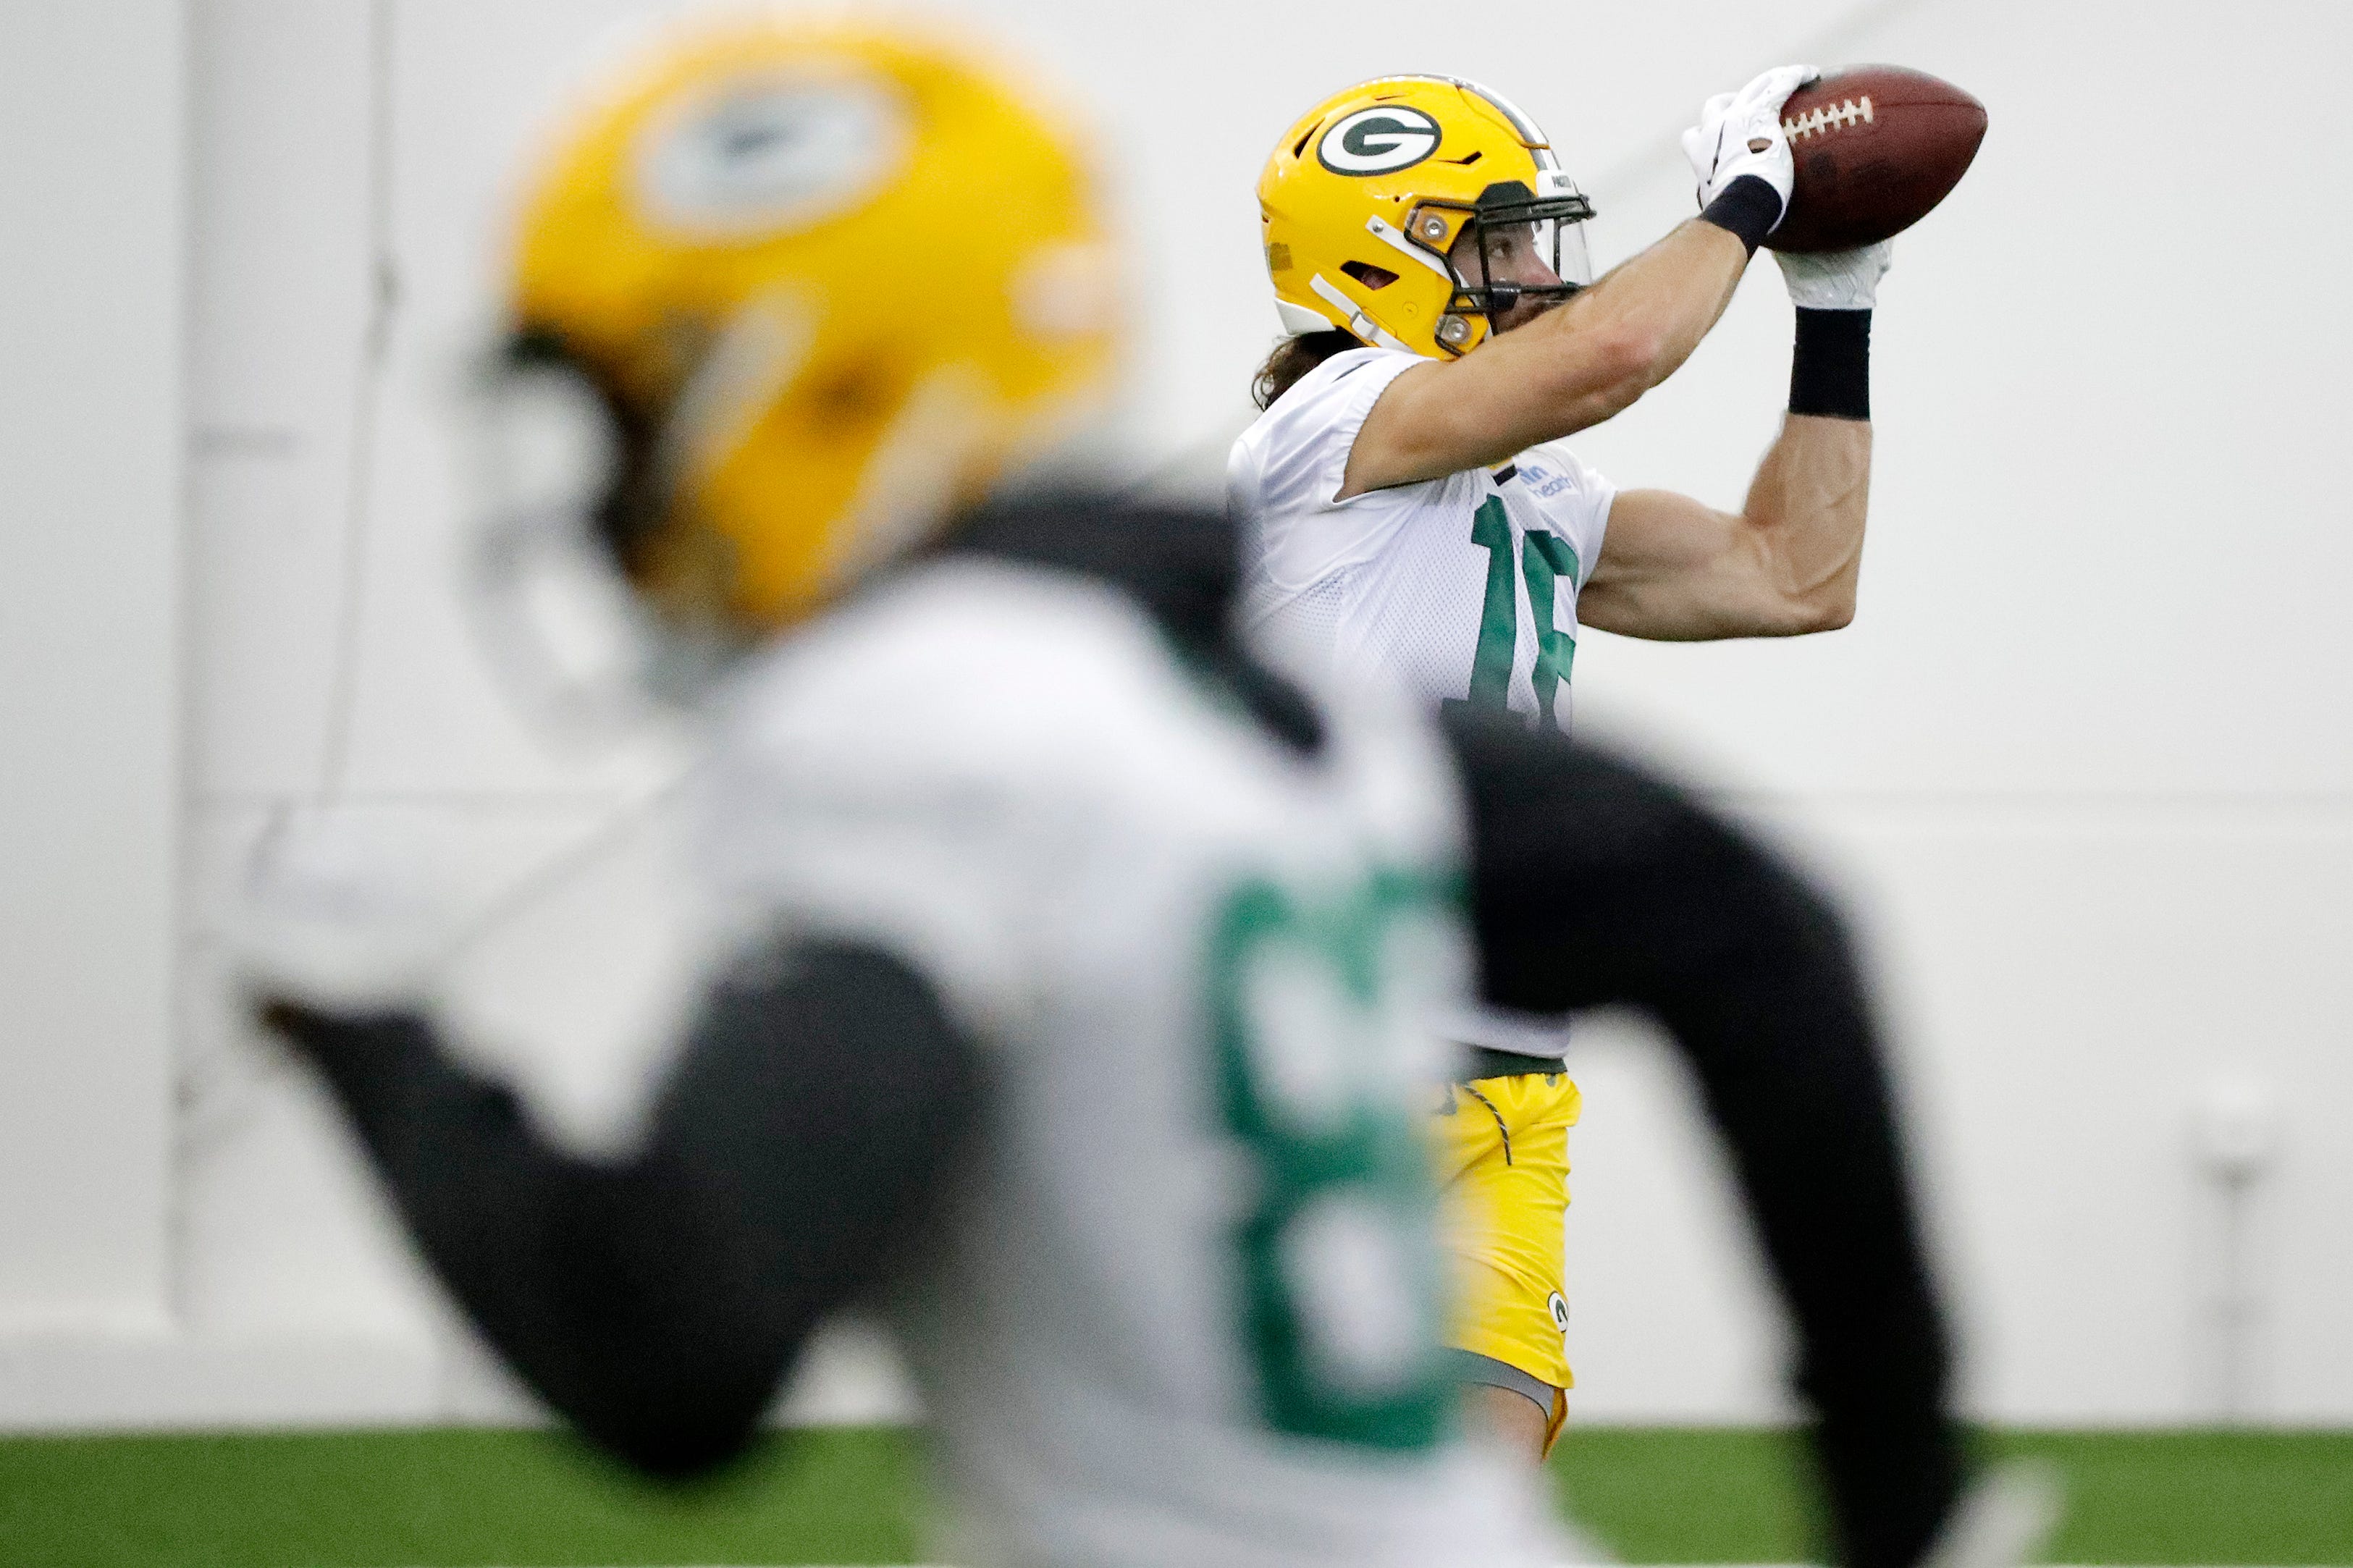 Green Bay Packers wide receiver Jake Kumerow (16) catches during a team practice at the Don Hutson Center on Wednesday, April 24, 2019 in Ashwaubenon, Wis.